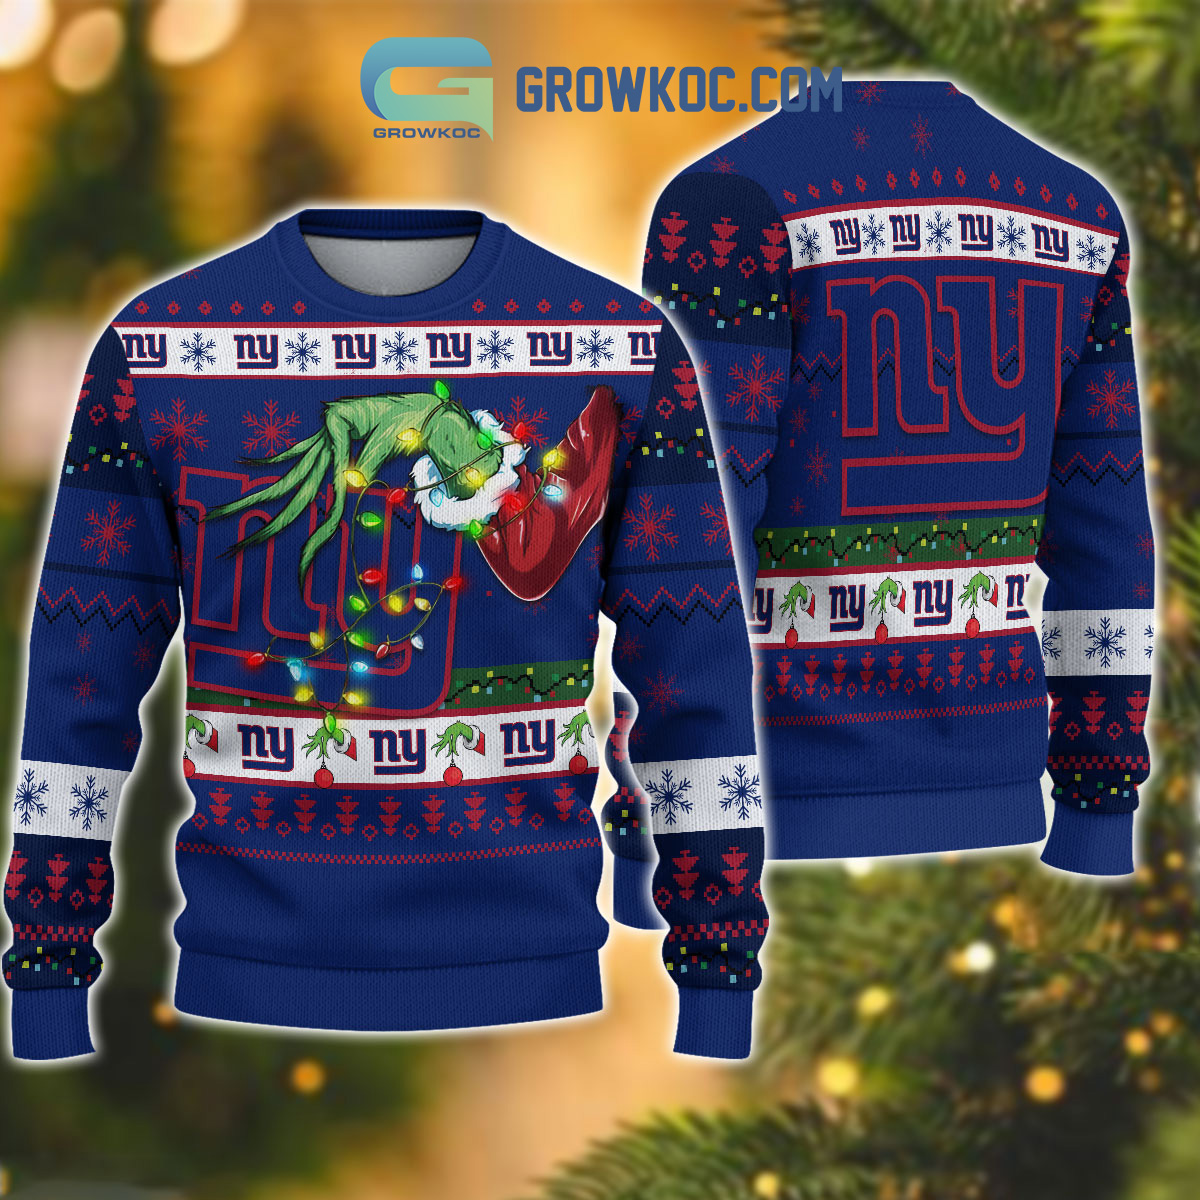 New NHL ugly sweaters are so bad they're good